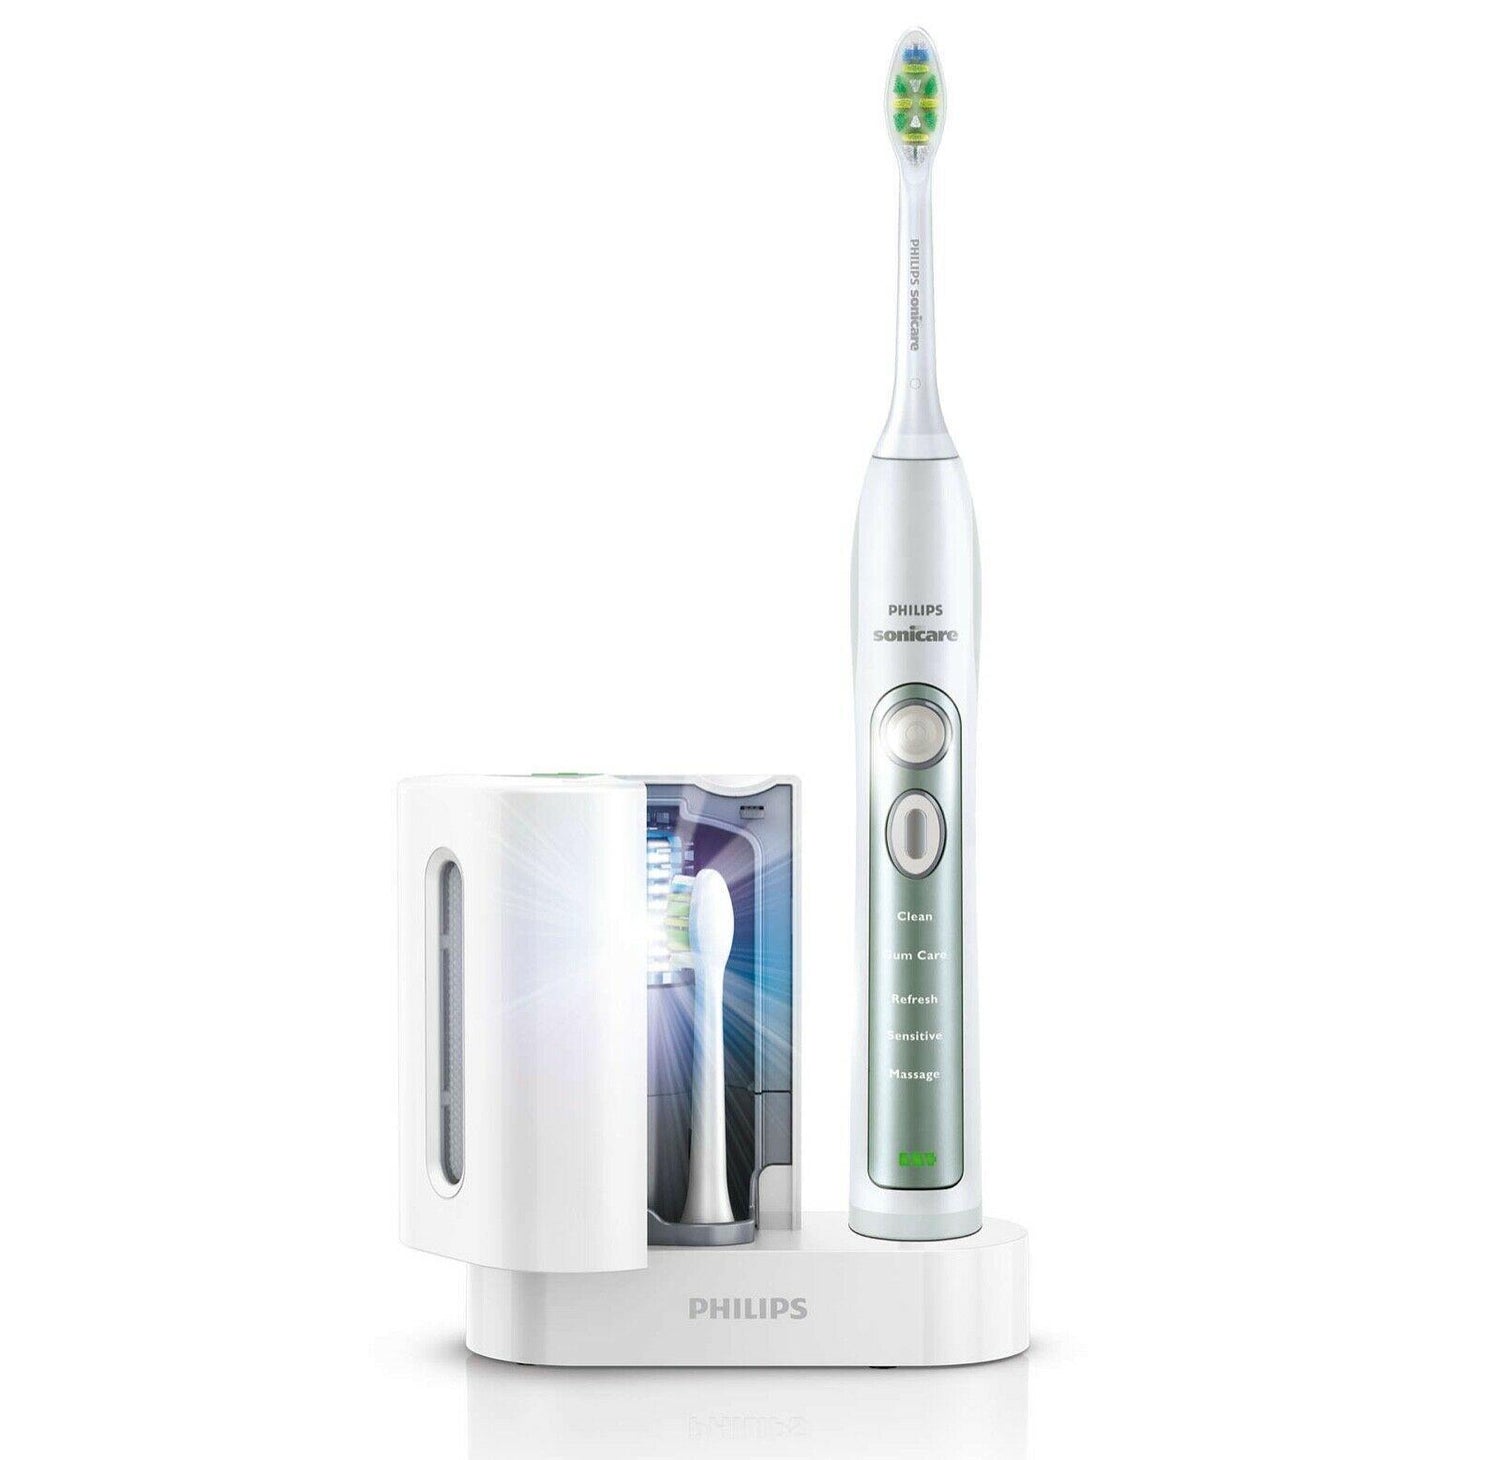 Philips Toothbrush Sonicare Hx6972 Flexcare Plus With Sanitiser